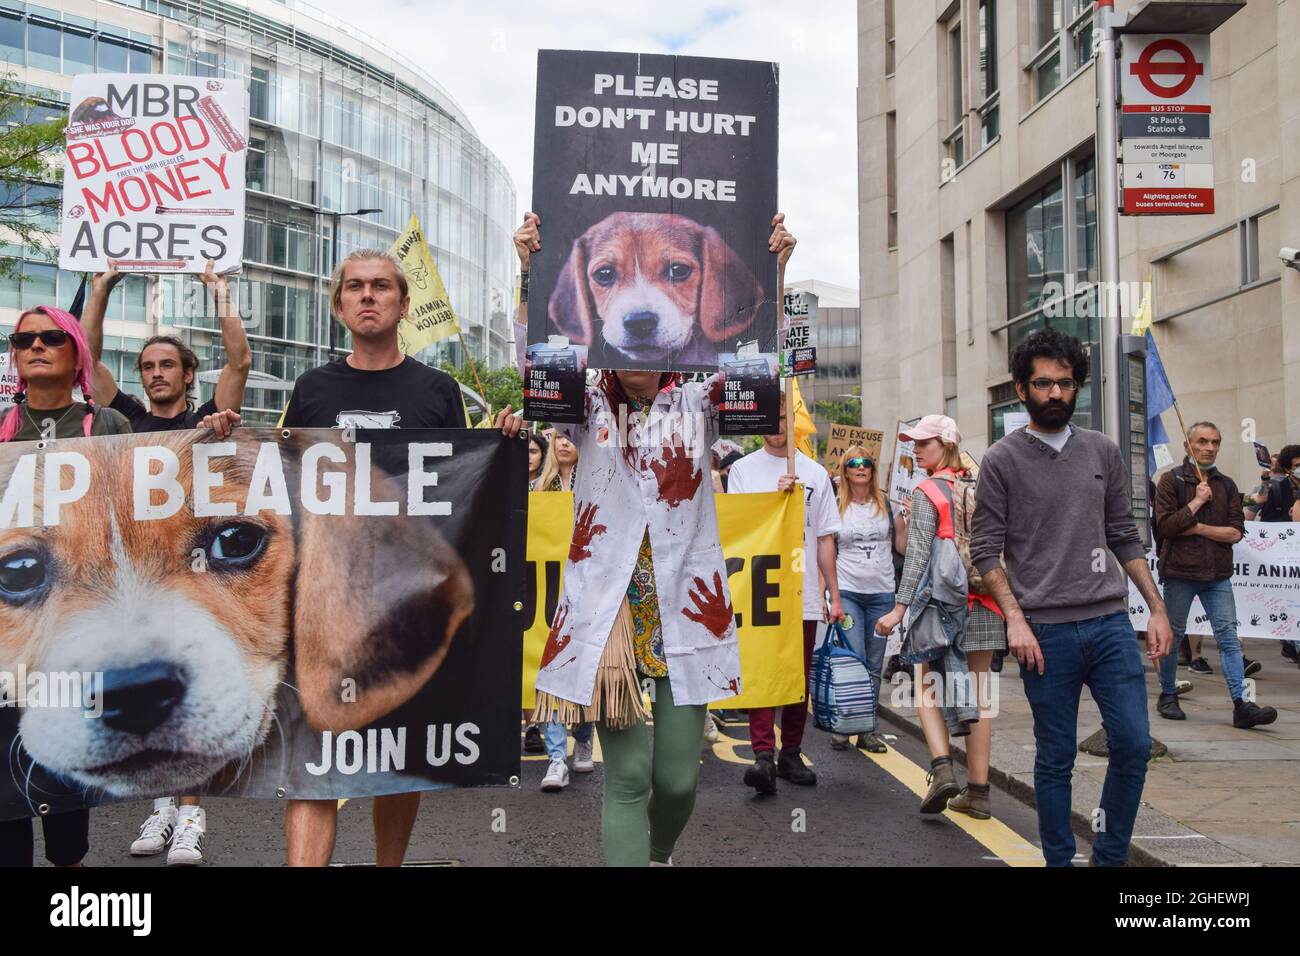 London, United Kingdom. 28th August 2021. Activists call for the release of  the MBR Acres beagles in the City of London during the National Animal  Rights March. Animal rights activists and organisations